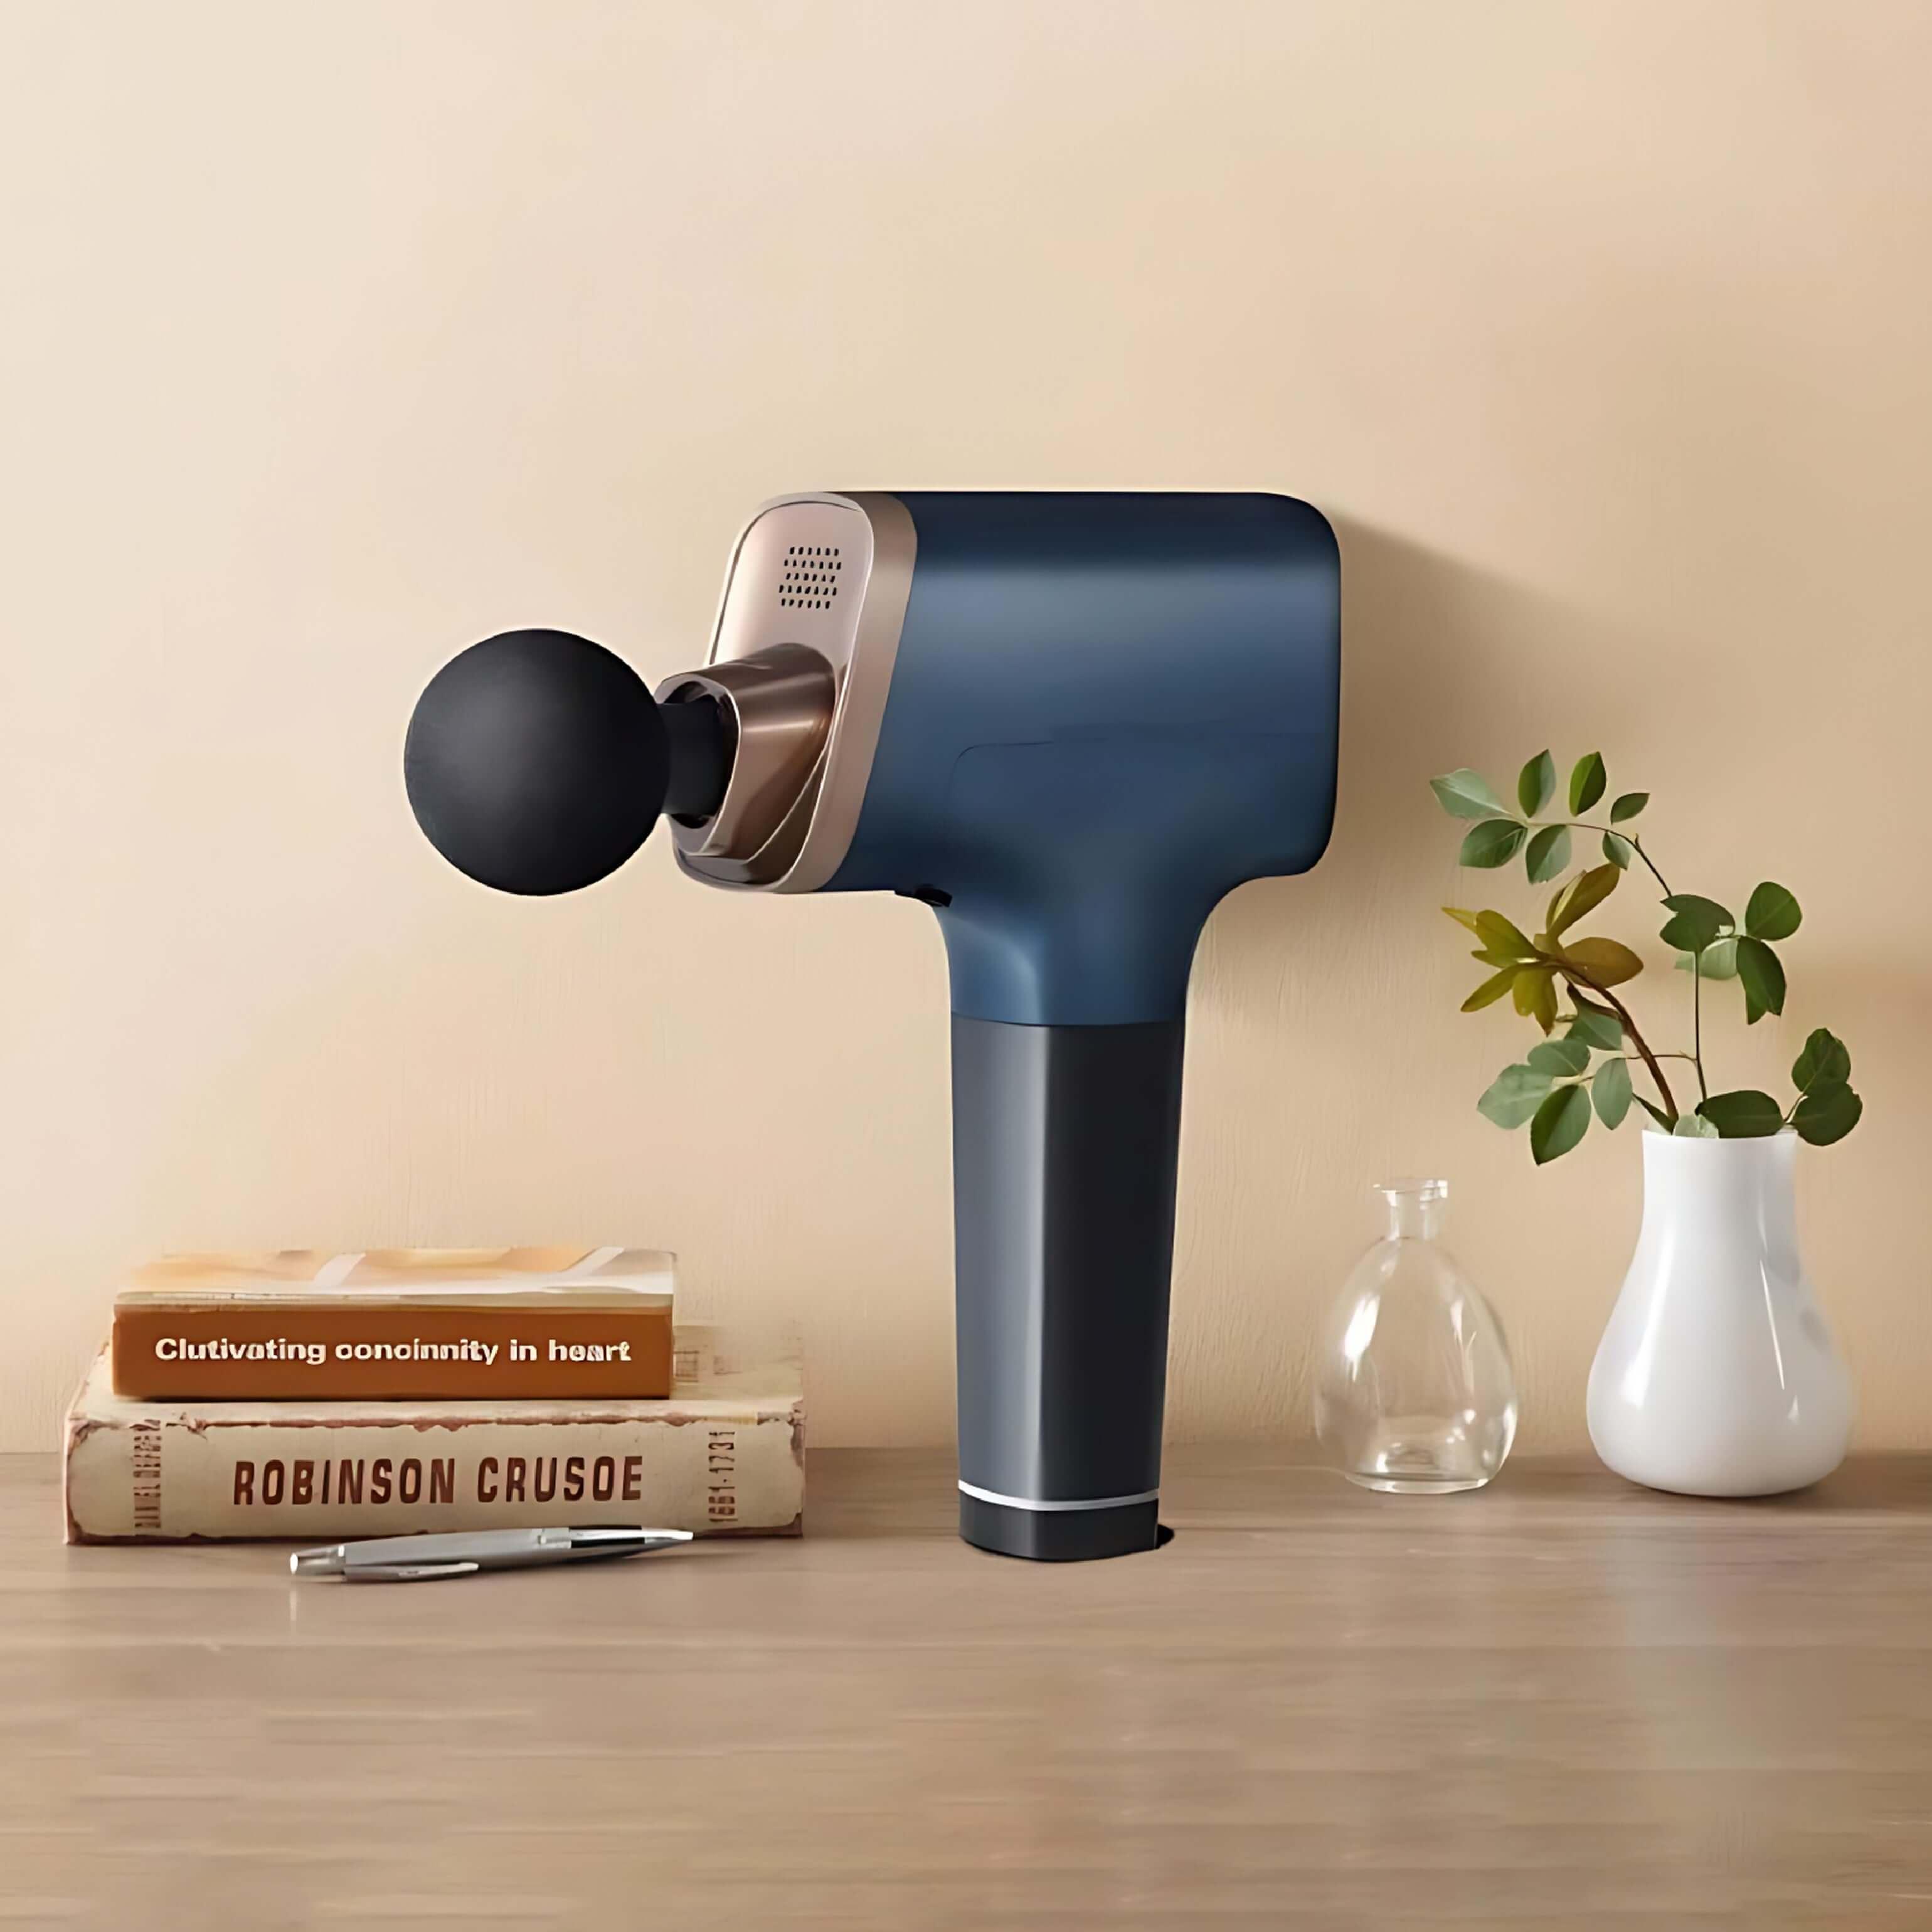 Dark blue handheld massage gun by Rotai, model RT1025, with replaceable massage heads placed on a wooden table near books and plants.